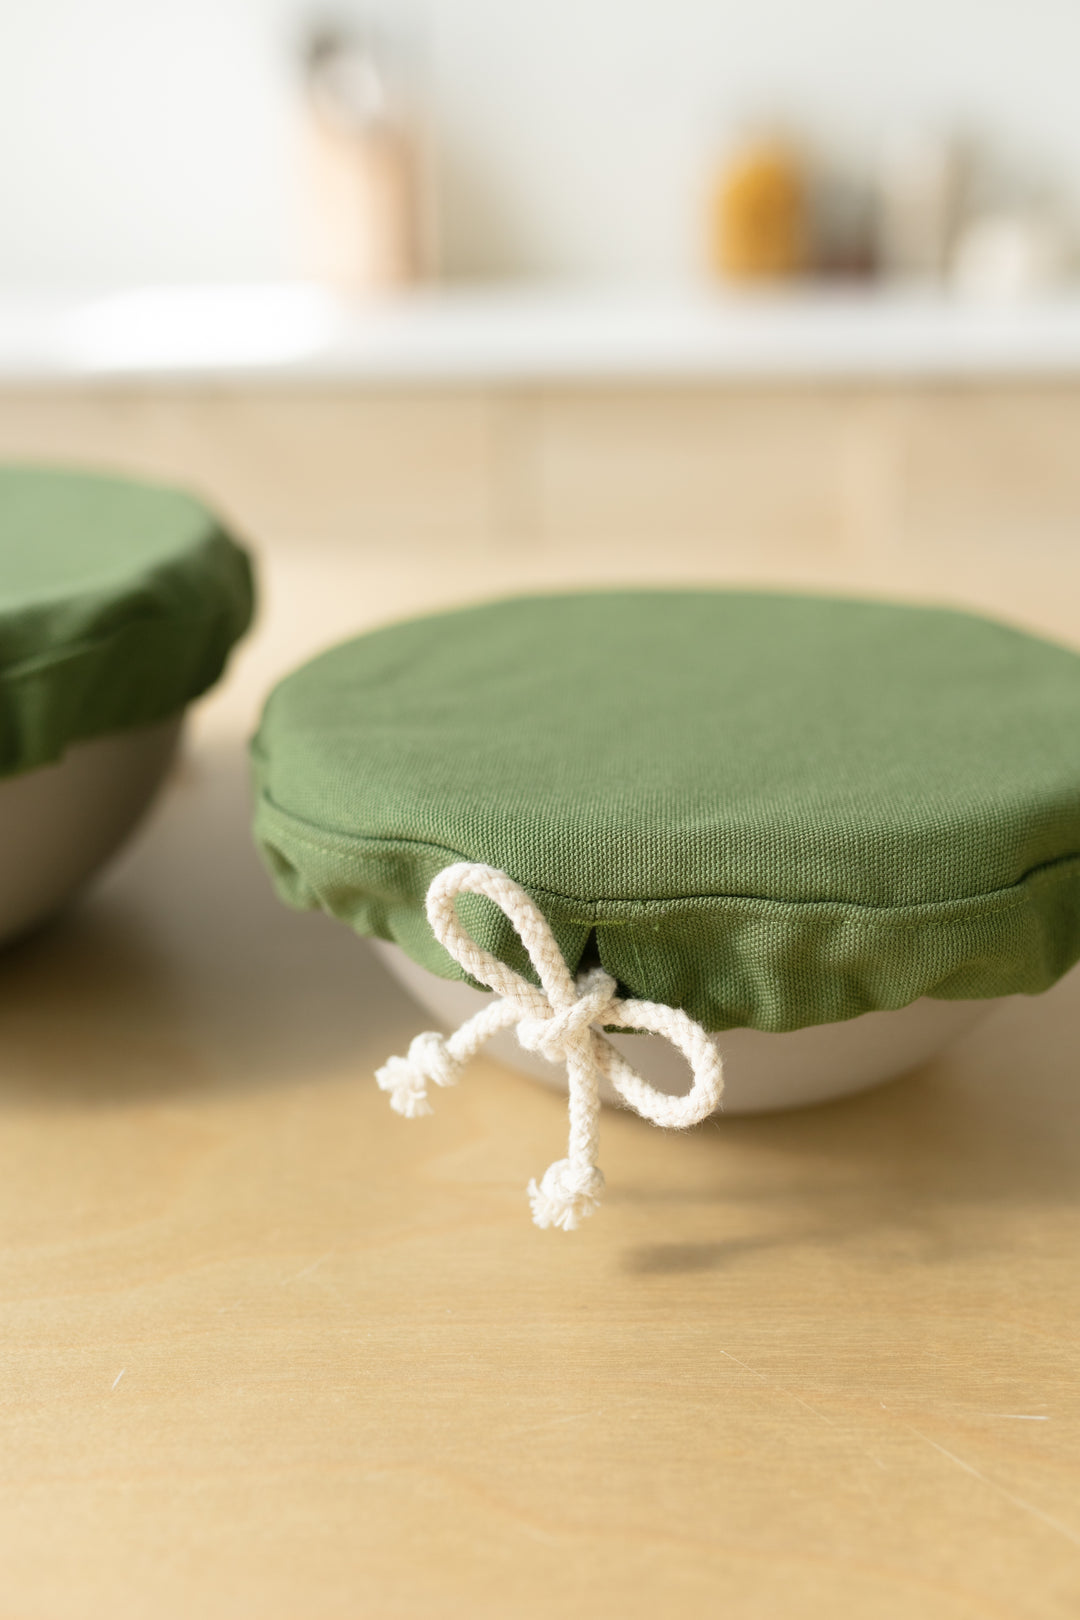 Couvre-Plat Small Bowl Cover | Olive